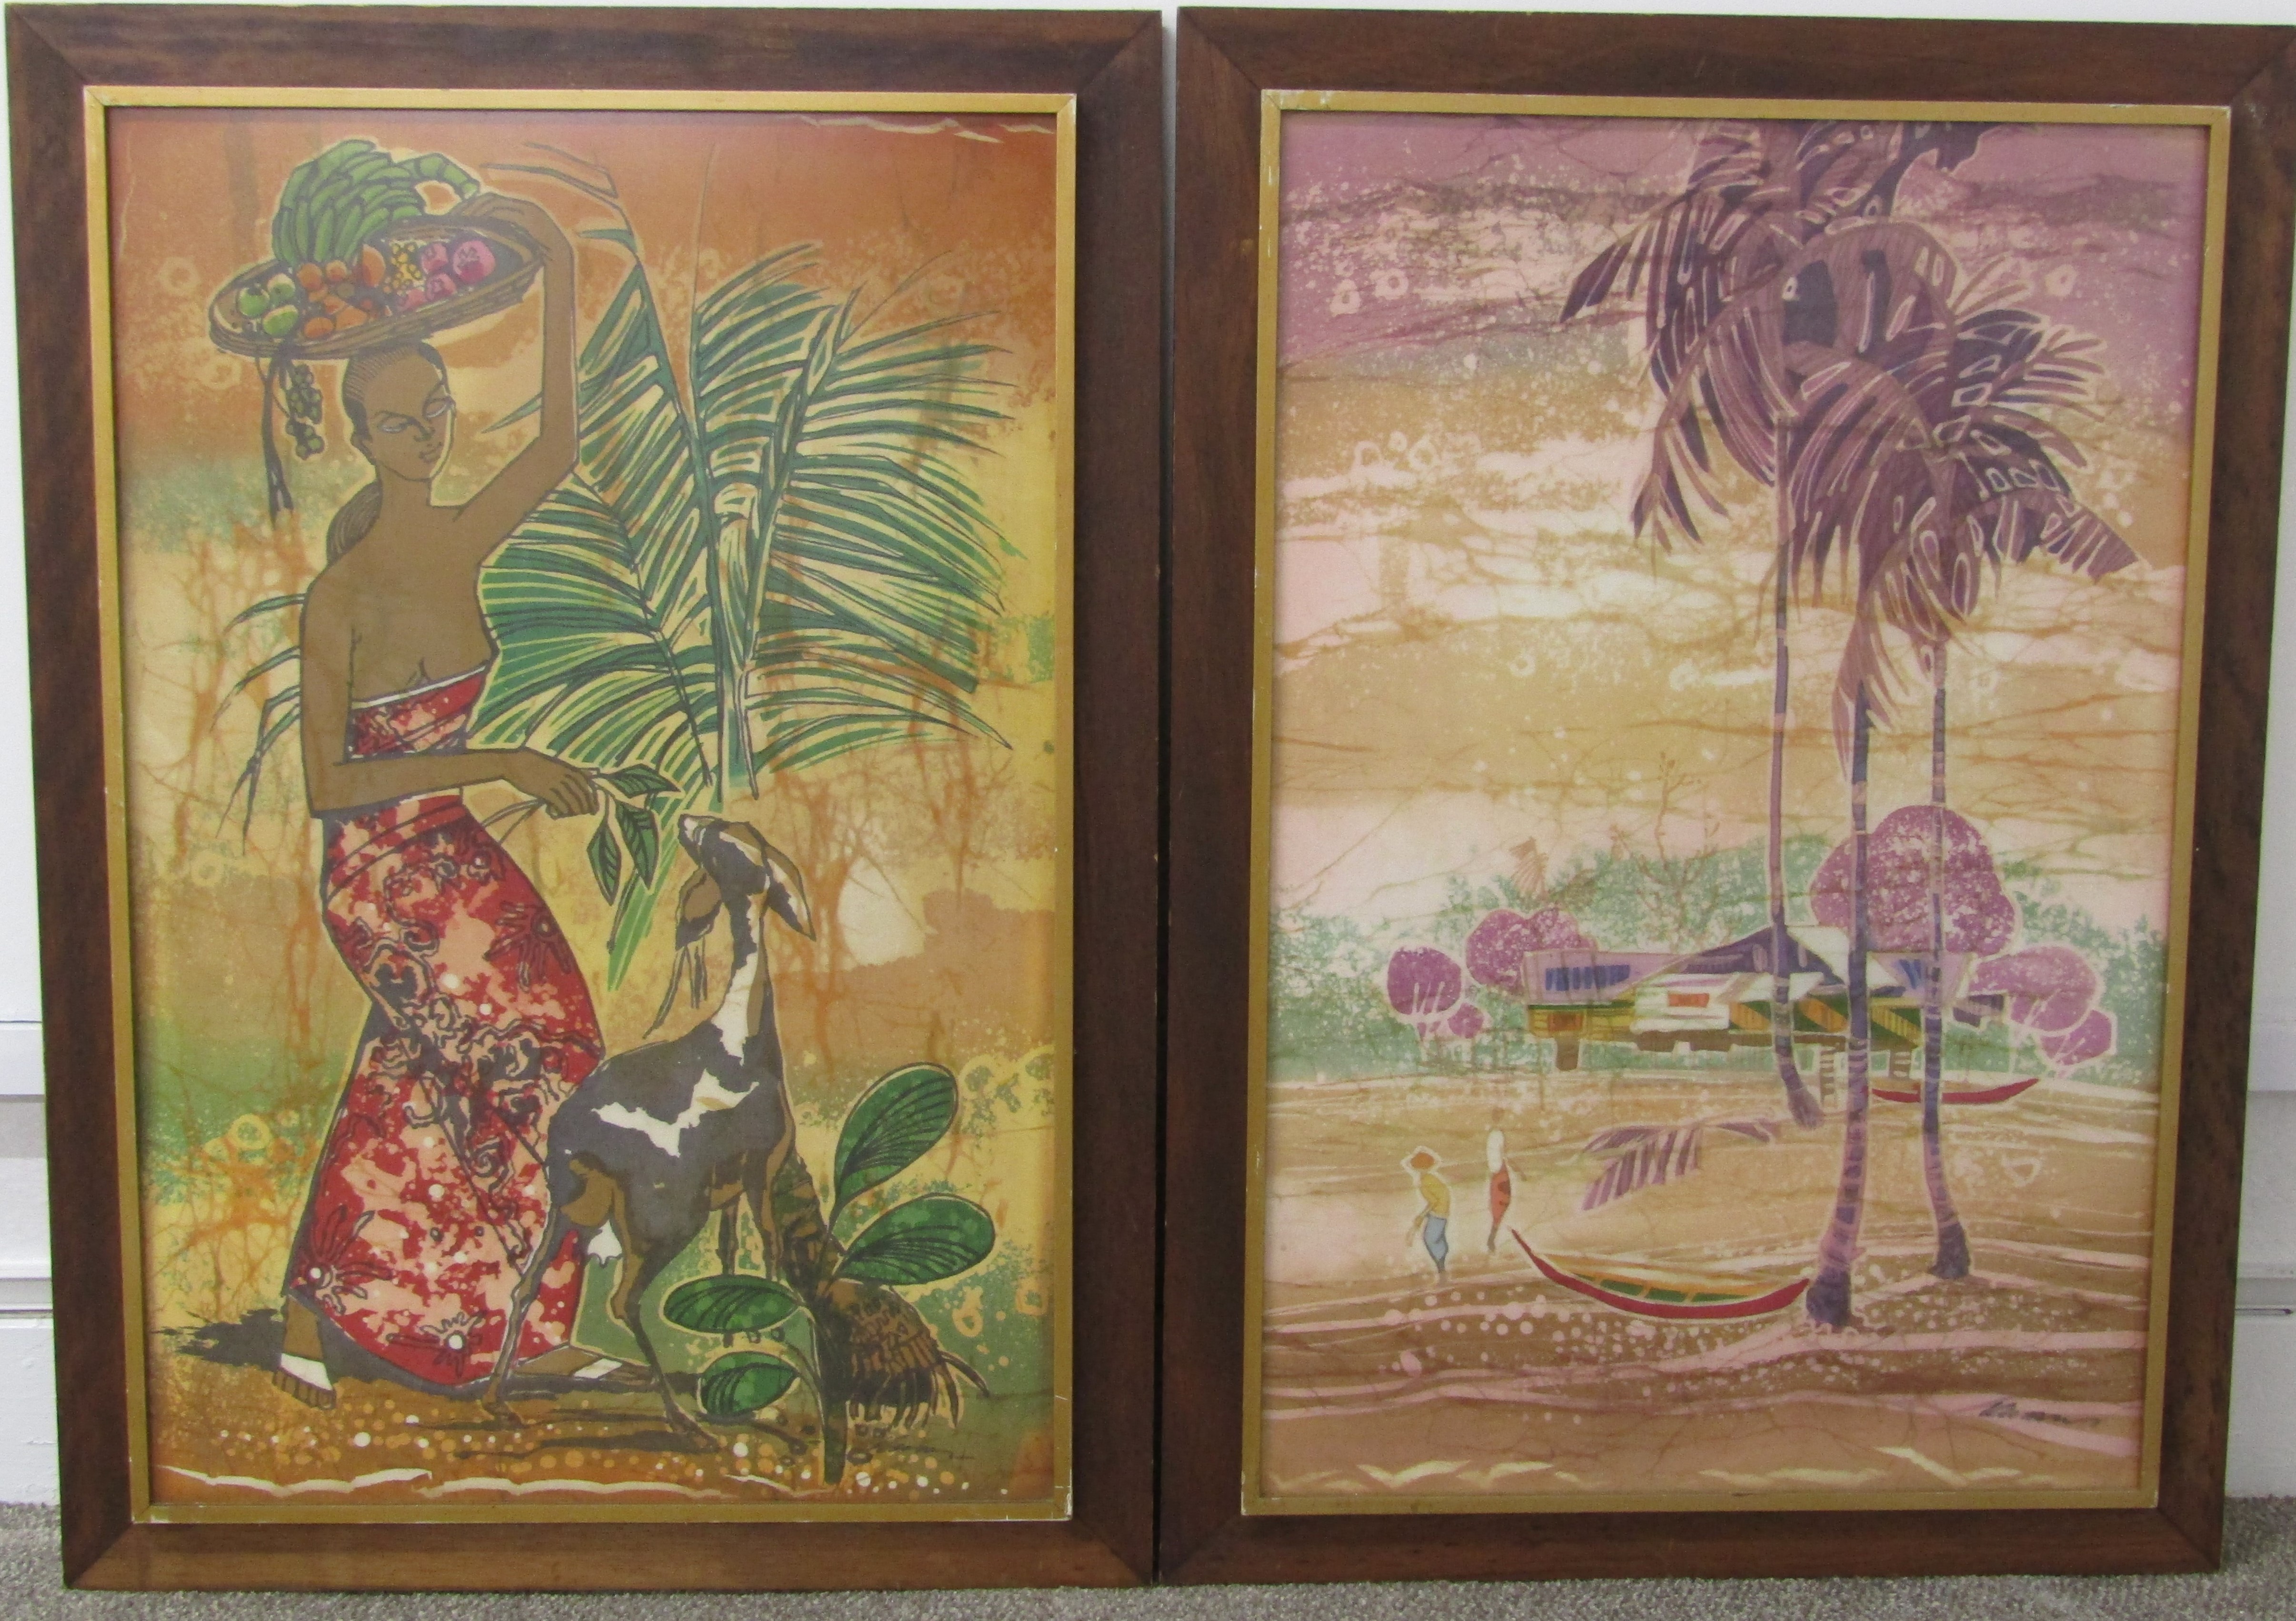 2 framed Batik silk screen prints signed Choo Keng Kwang (possibly) one with lady carrying basket on